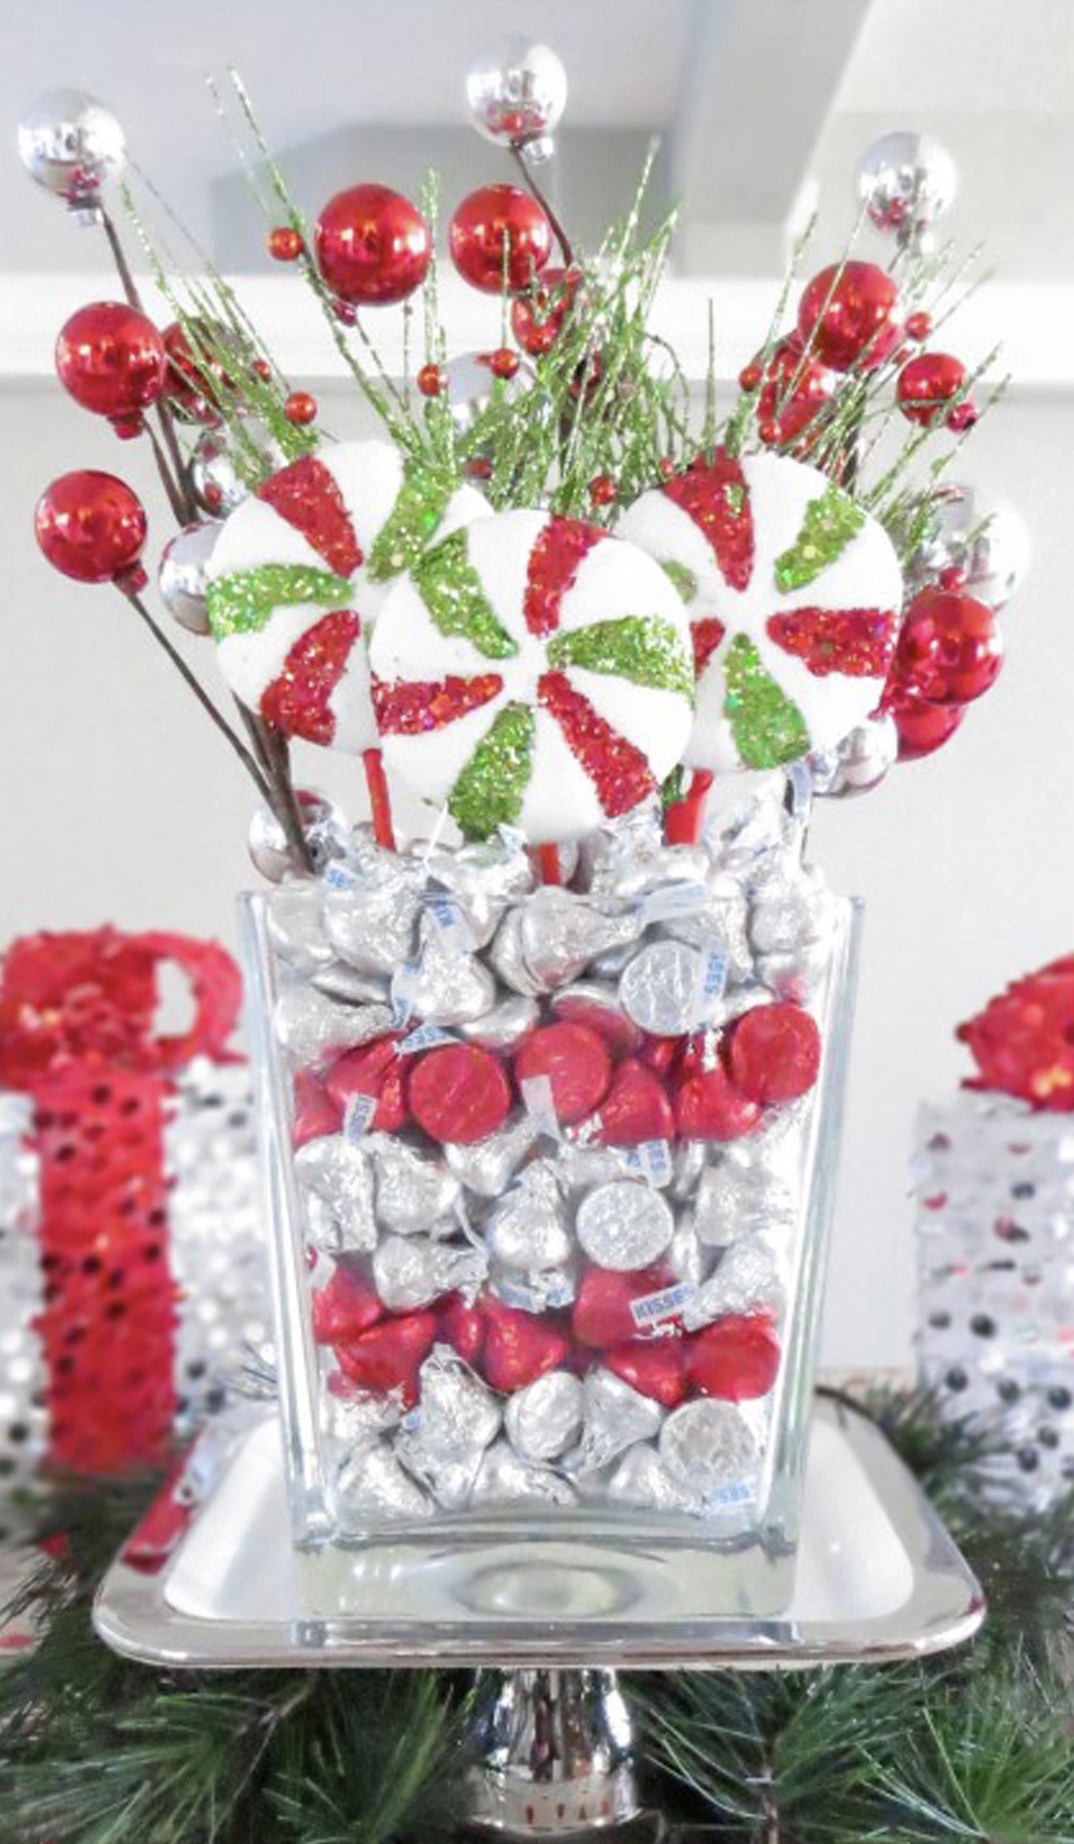 Hershey's Kisses Centerpiece - This centerpiece is not only gorgeous and inviting but best of all, it's edible!